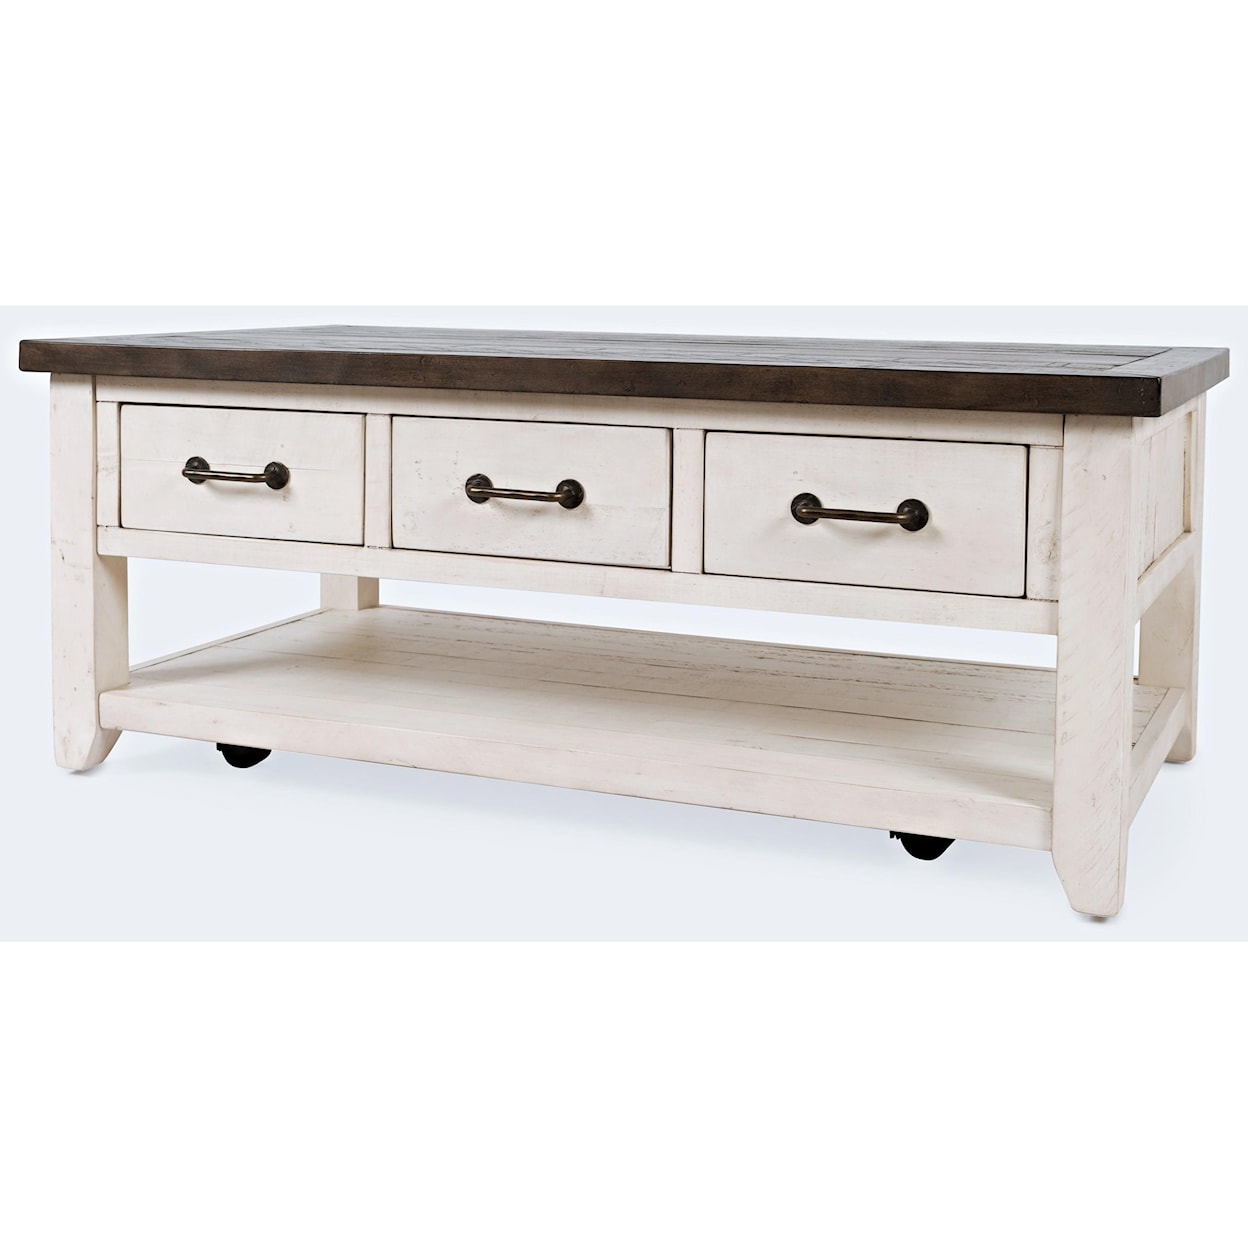 VFM Signature Morgan County 3 Drawer Cocktail Table-Vintage White